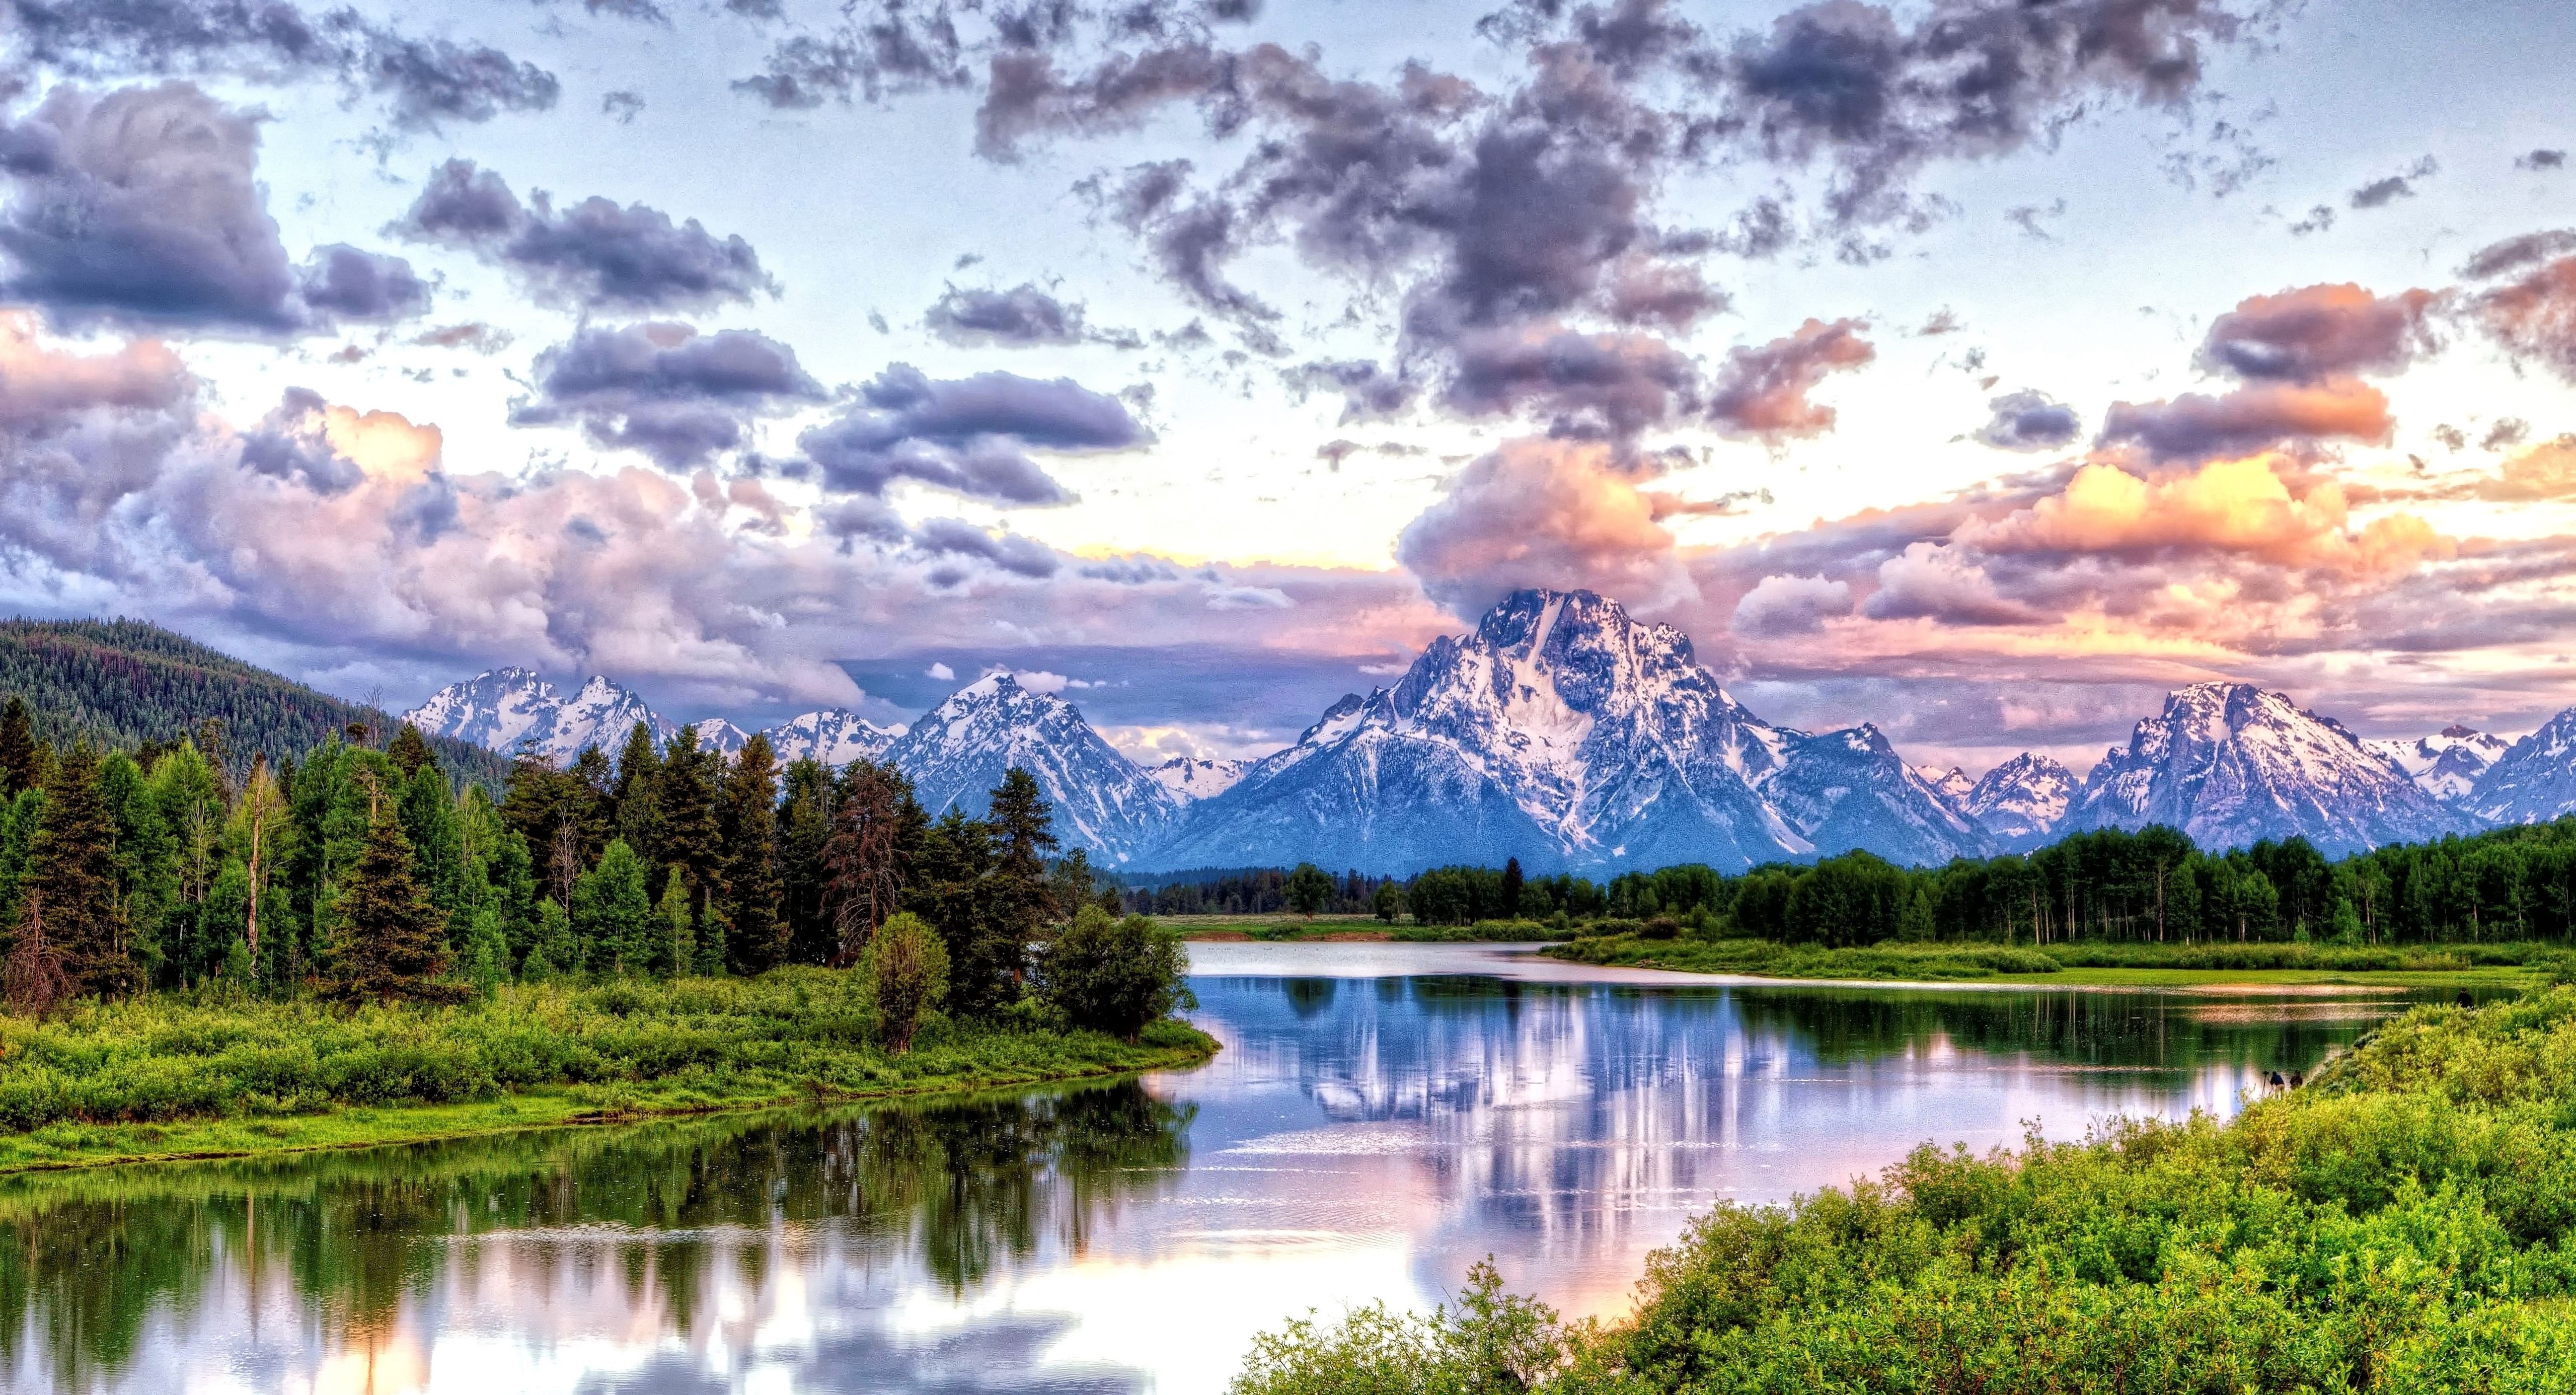 oxbow, Bend, Grand, Teton, National, Park, Hdr, Mountains, River, Sunset, Sunrise, Clouds Wallpaper